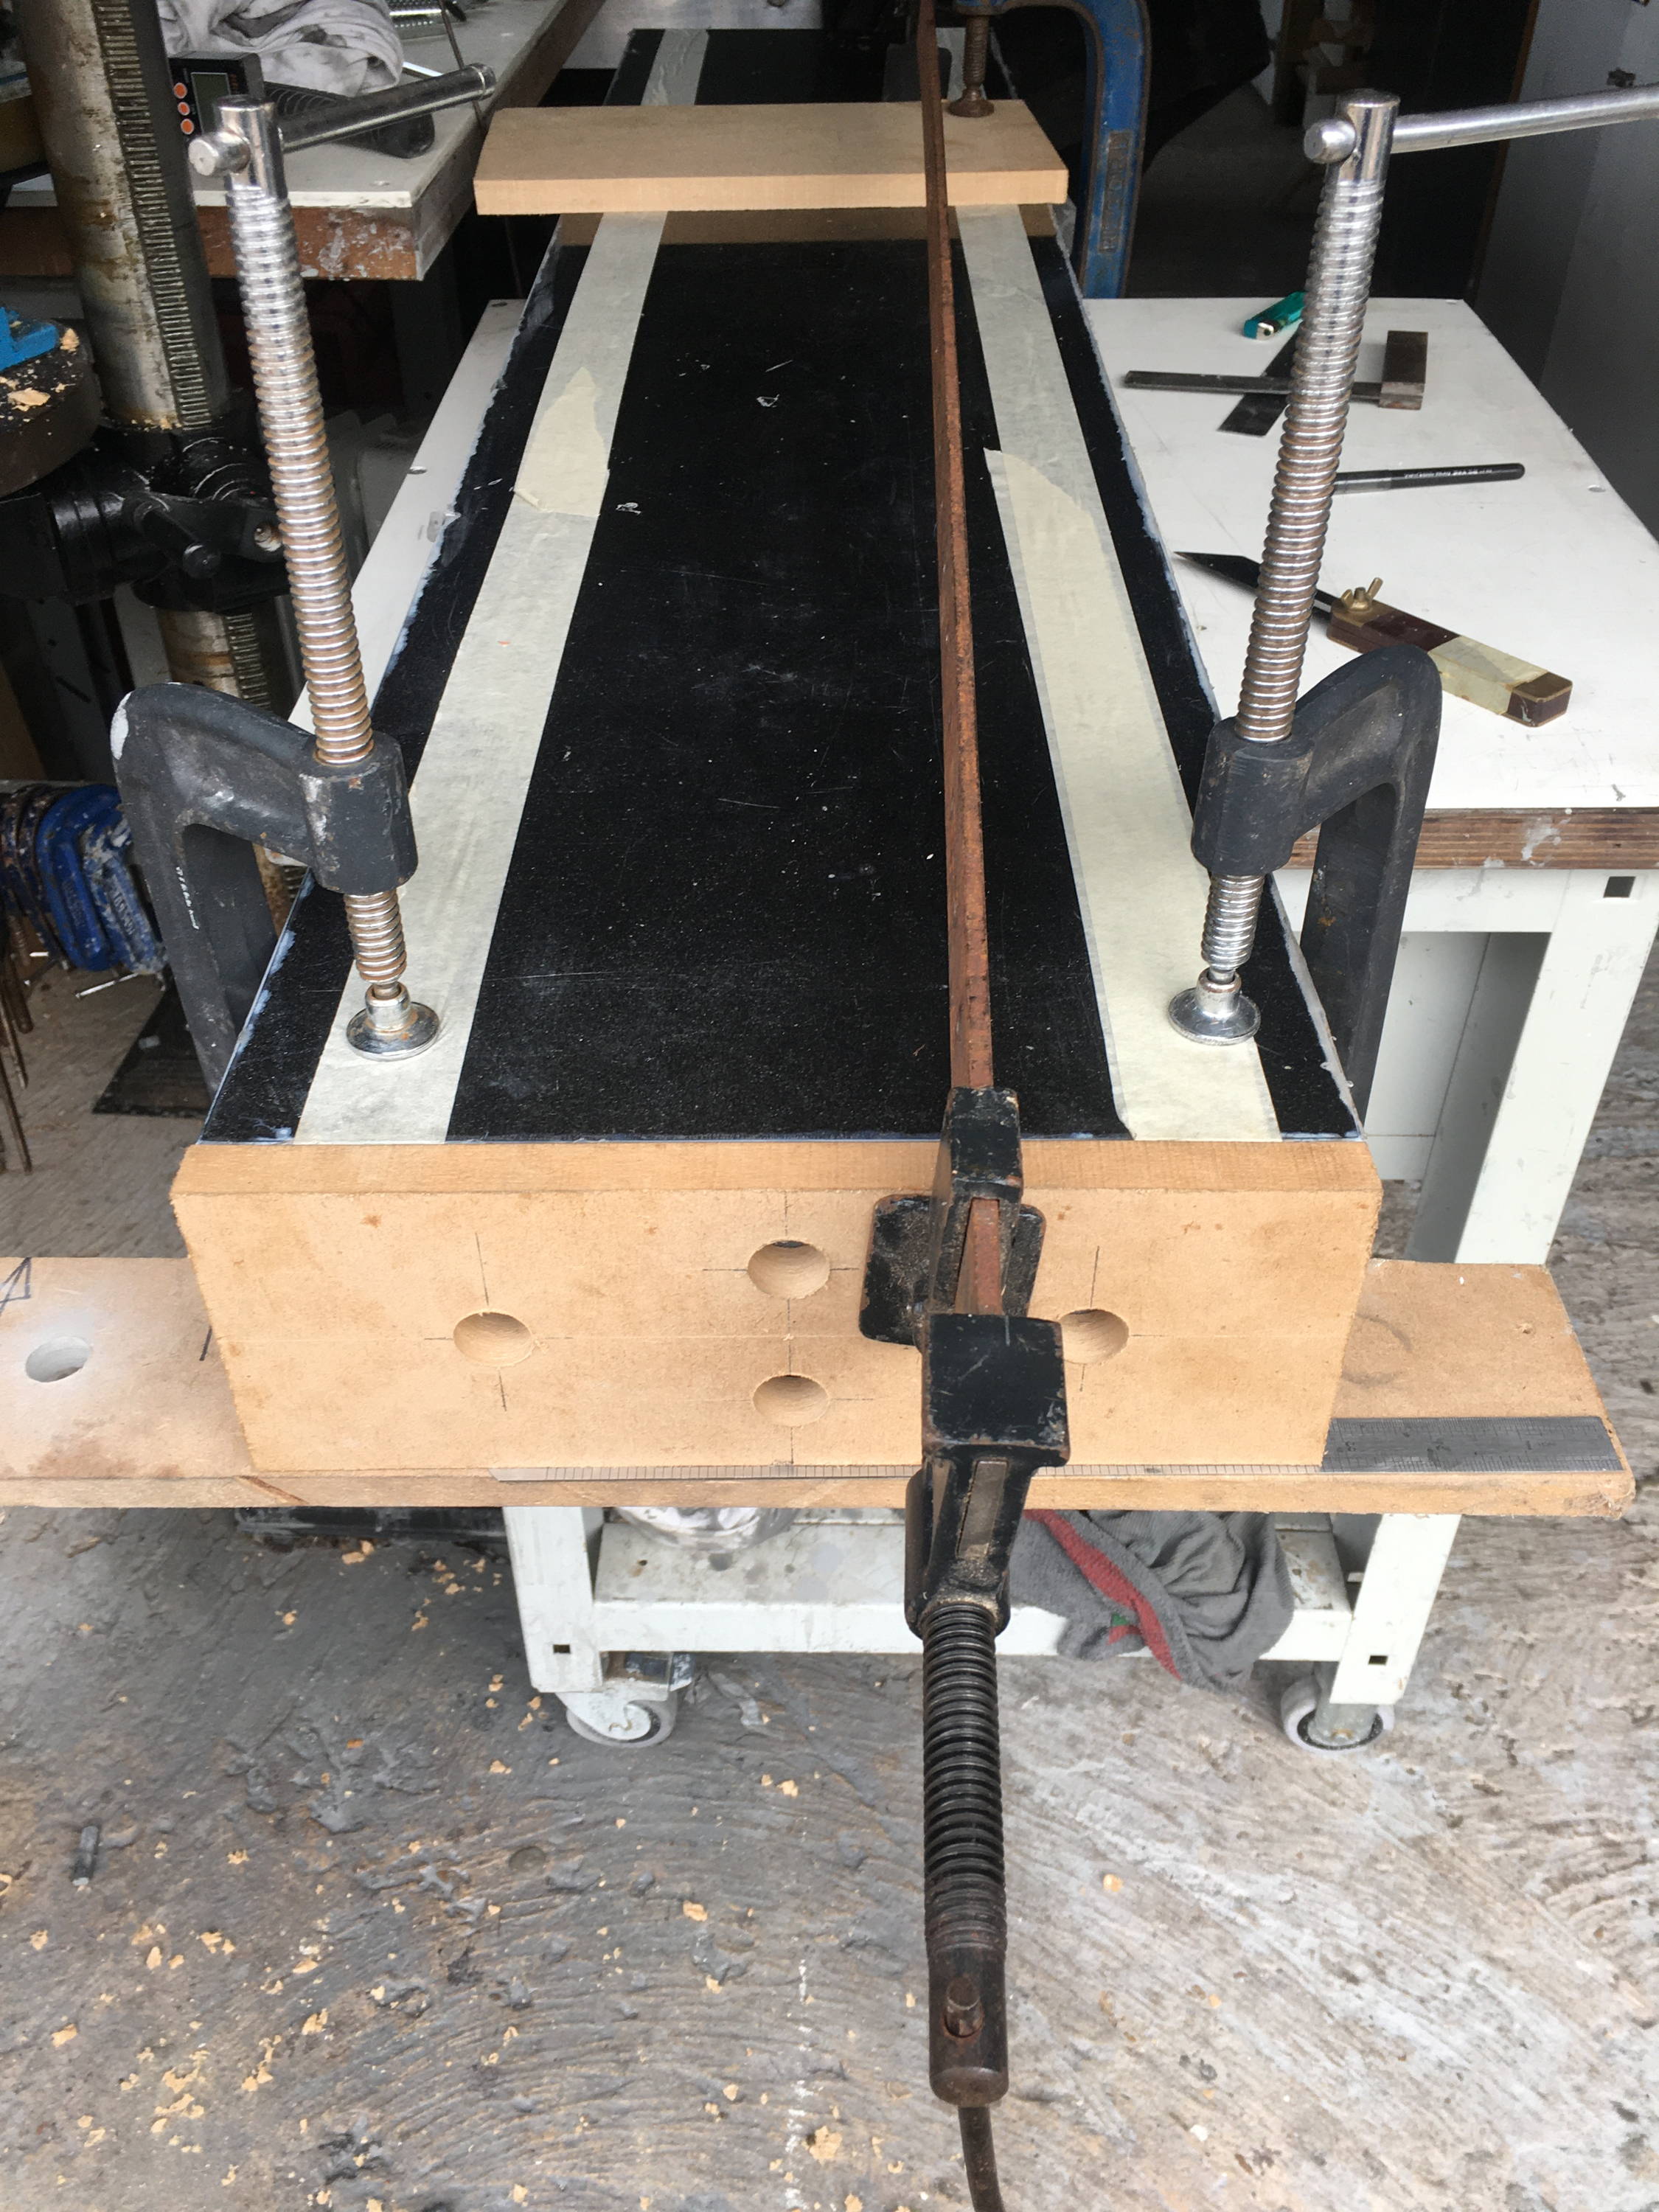 Image of a driling jig for drilling the holes in the end of the granite block for cementing in M12 inserts.